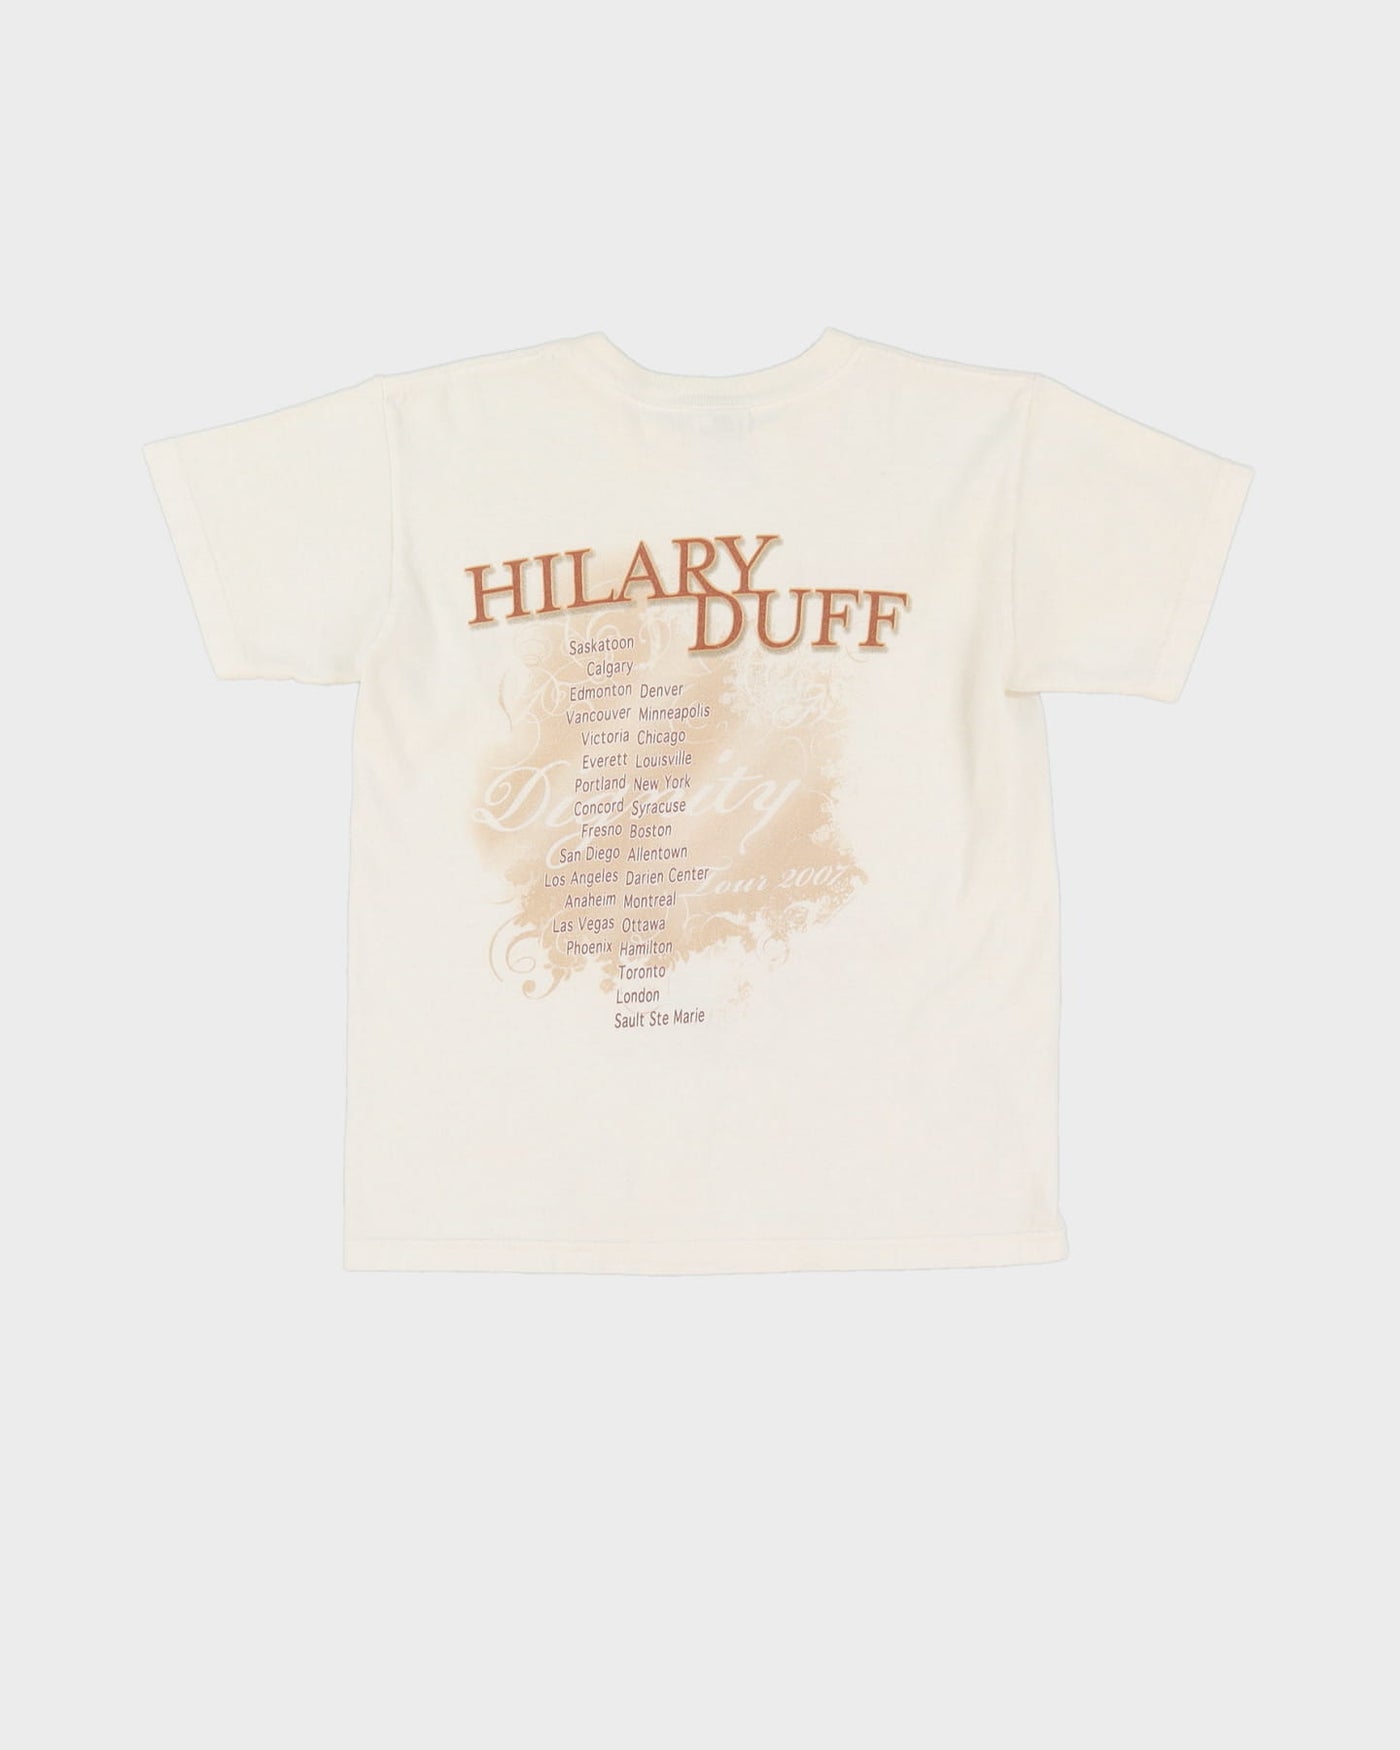 Baby Fit 00s Y2K Hilary Duff Dignity White Graphic Band T-Shirt - XXS